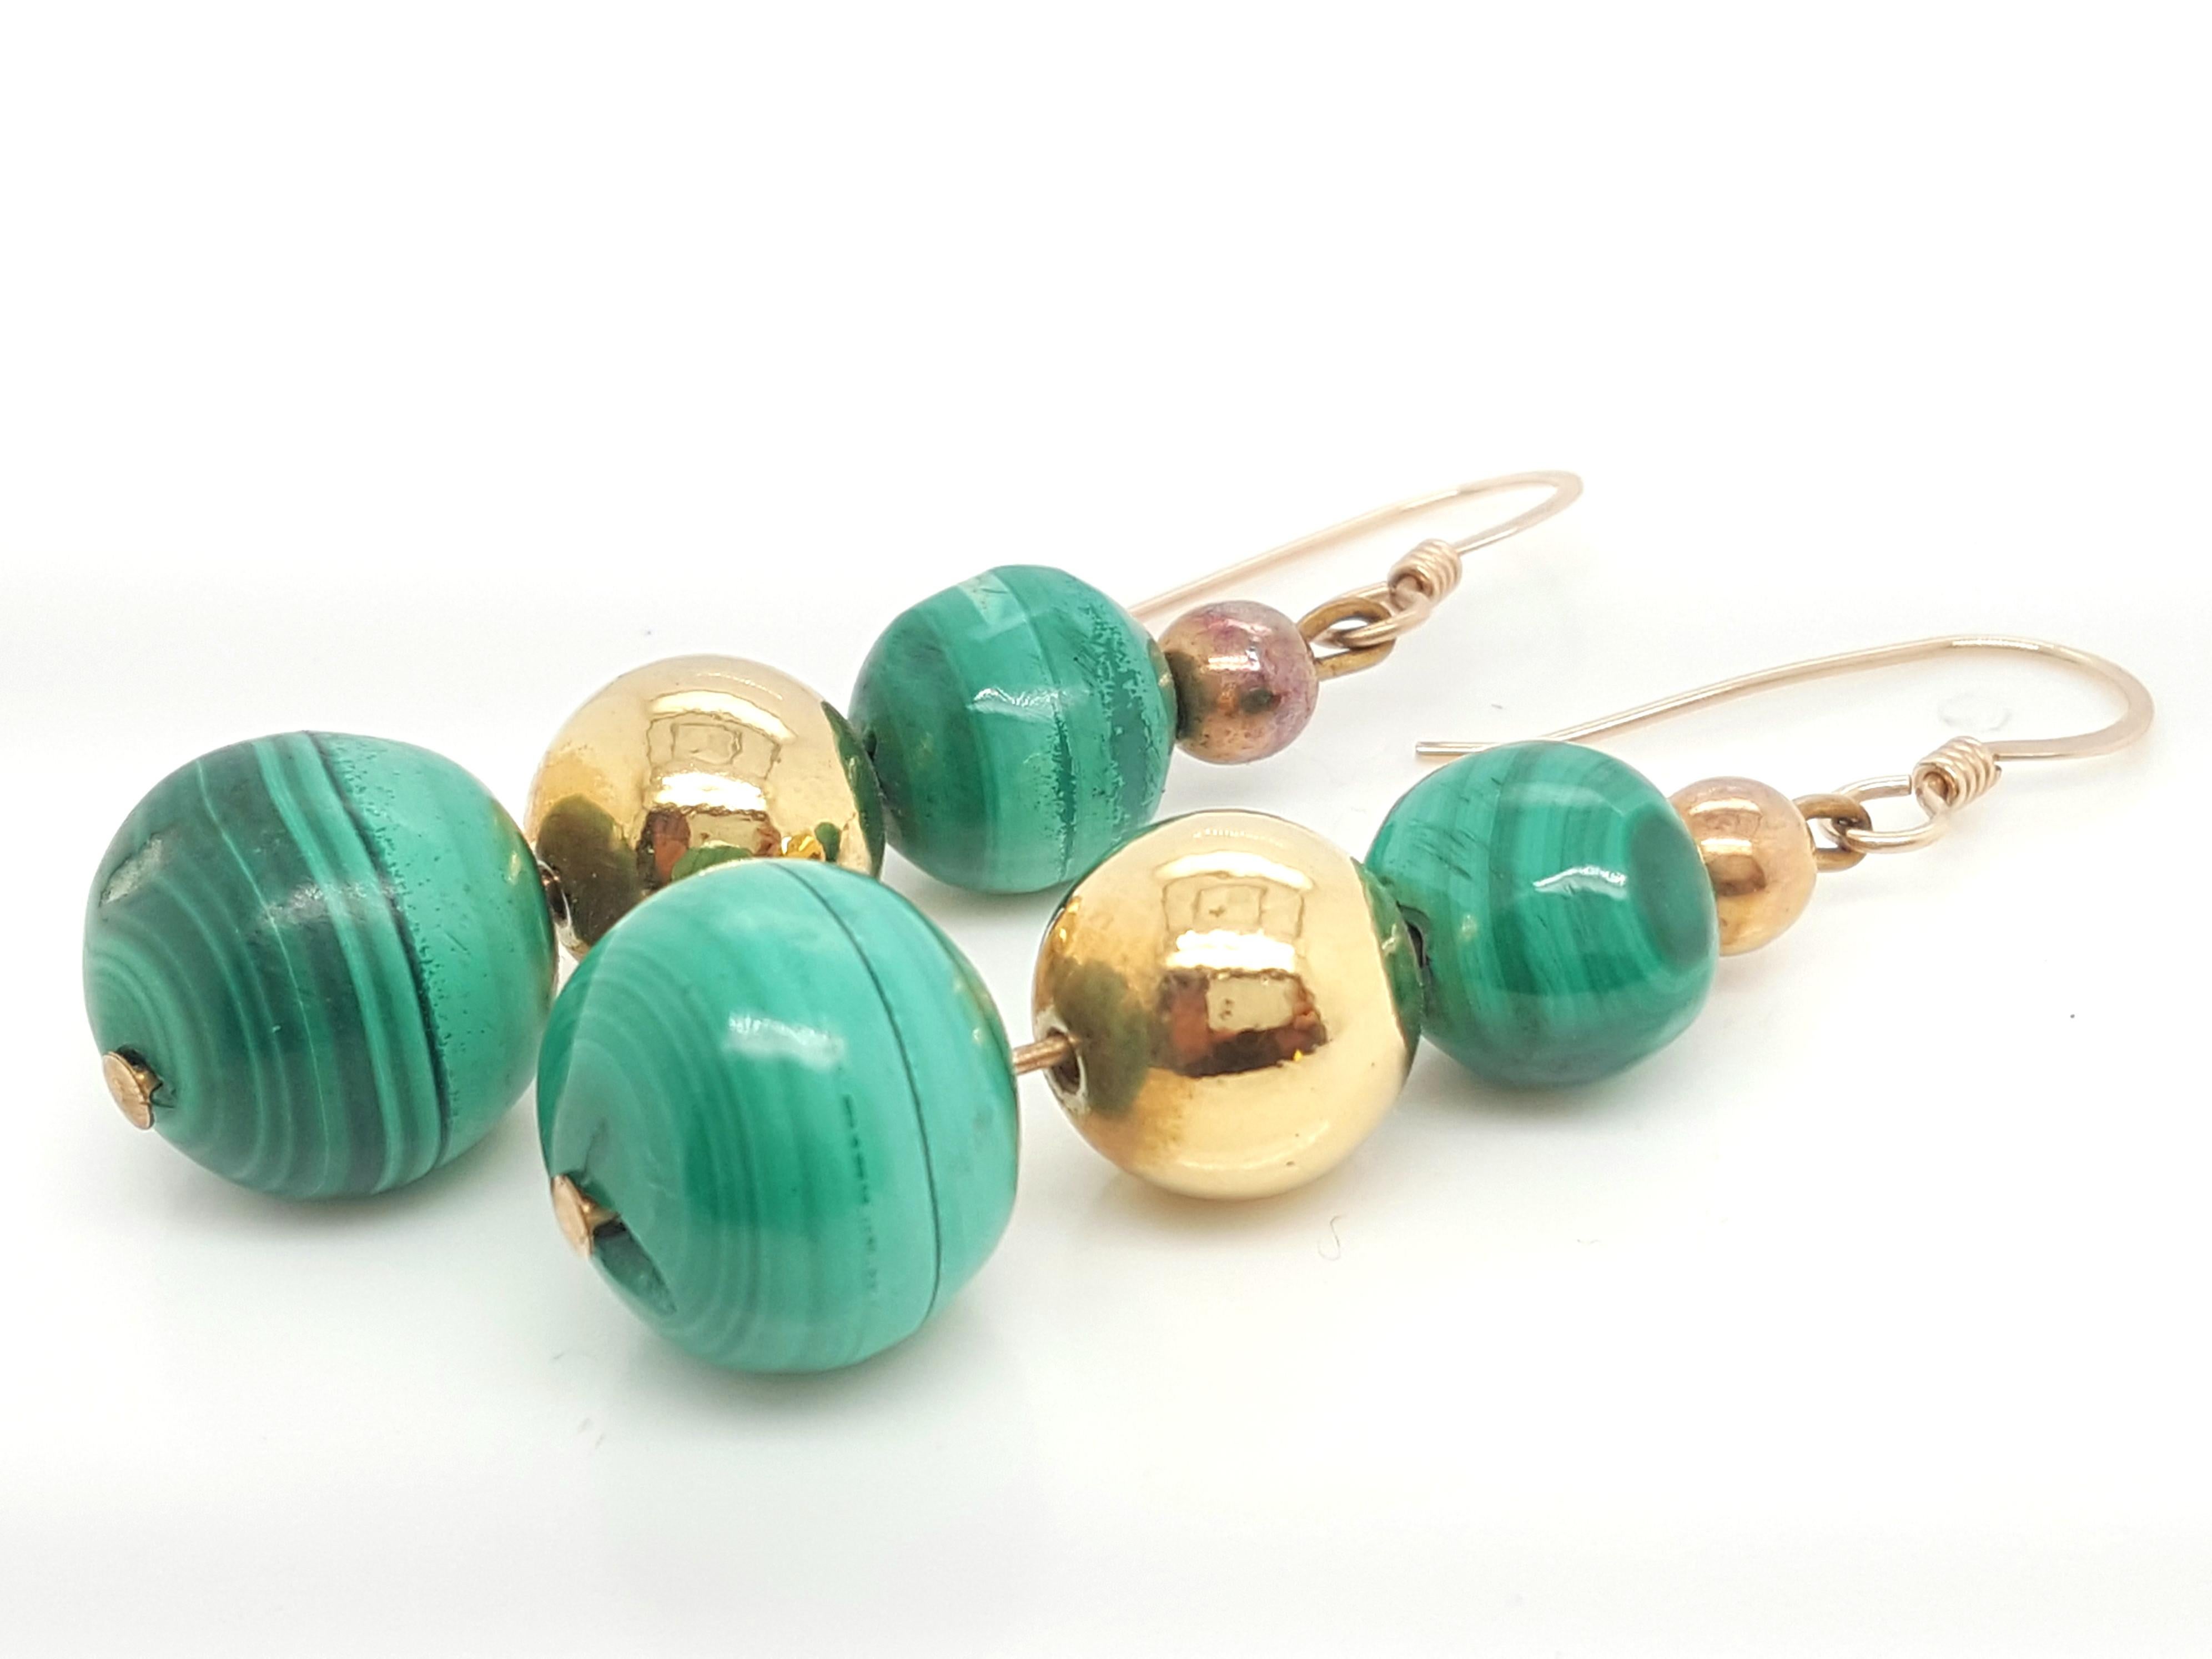 Graduated Malachite Bead Earrings Accented by Gold-Plated Beads In Good Condition For Sale In Addison, TX